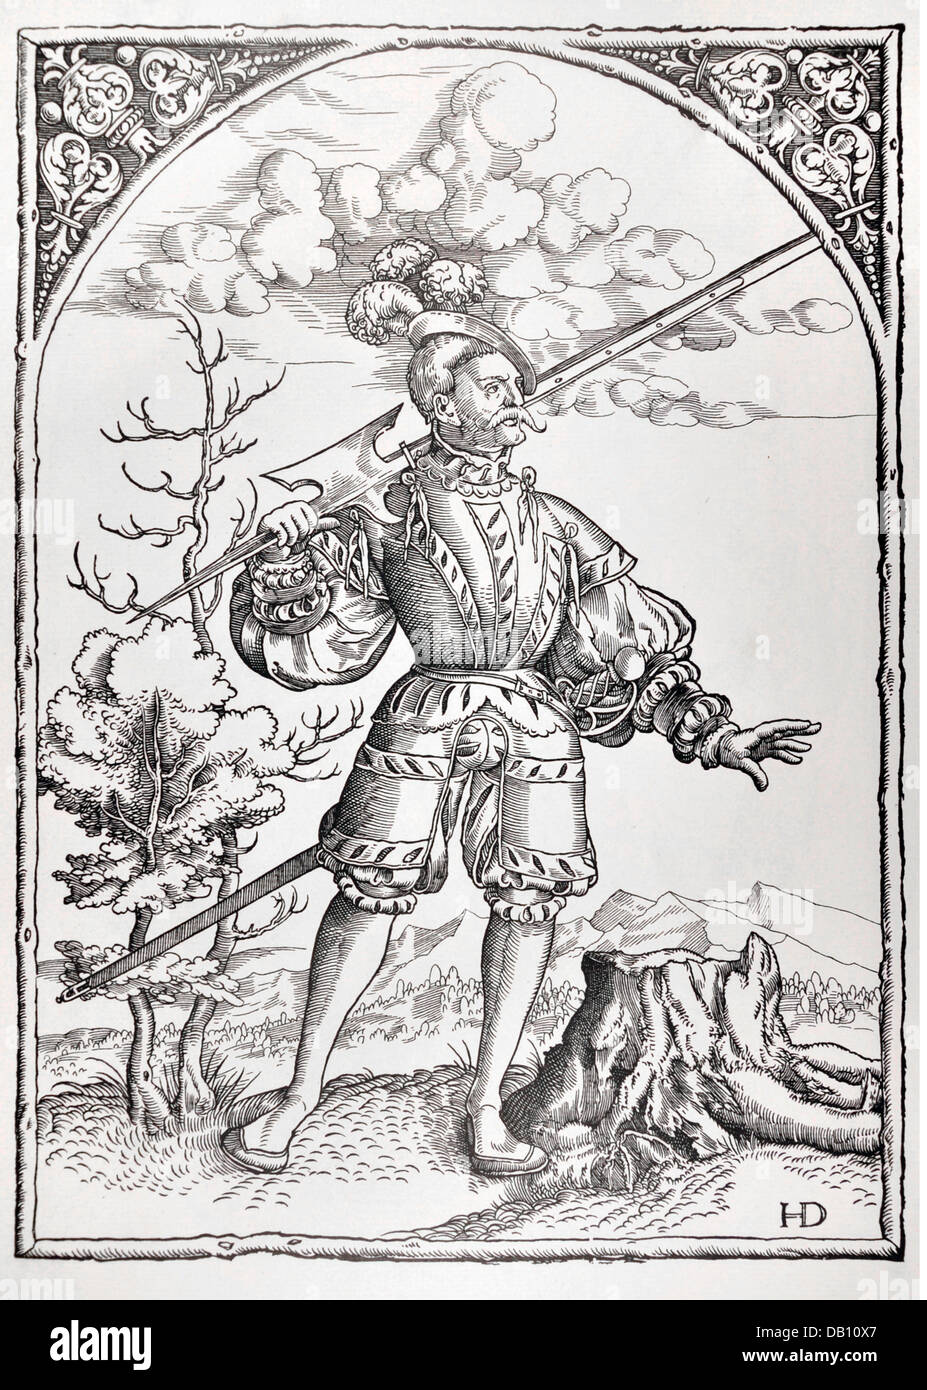 military,lansquenets,leader of the lansquenets,full length,standing,woodcut,by H.D.,circa 1545,from: Warriors of his Roman Imperial Majesty at the age of the lansquenets,edited by August Johann Count Breuner von Enkevoirt,Vienna 1883,16th century,fine arts,art,graphic,graphics,Holy Roman Empire,soldier,soldiers,clothes,hat,hats,beret,berets,plume,panache,moustache,mustache,moustaches,mustaches,walrus moustache,walrus moustaches,moustache,mustache,moustaches,mustaches,suit of armour,armour,armor,breeches,knee breeches,weap,Additional-Rights-Clearences-Not Available Stock Photo